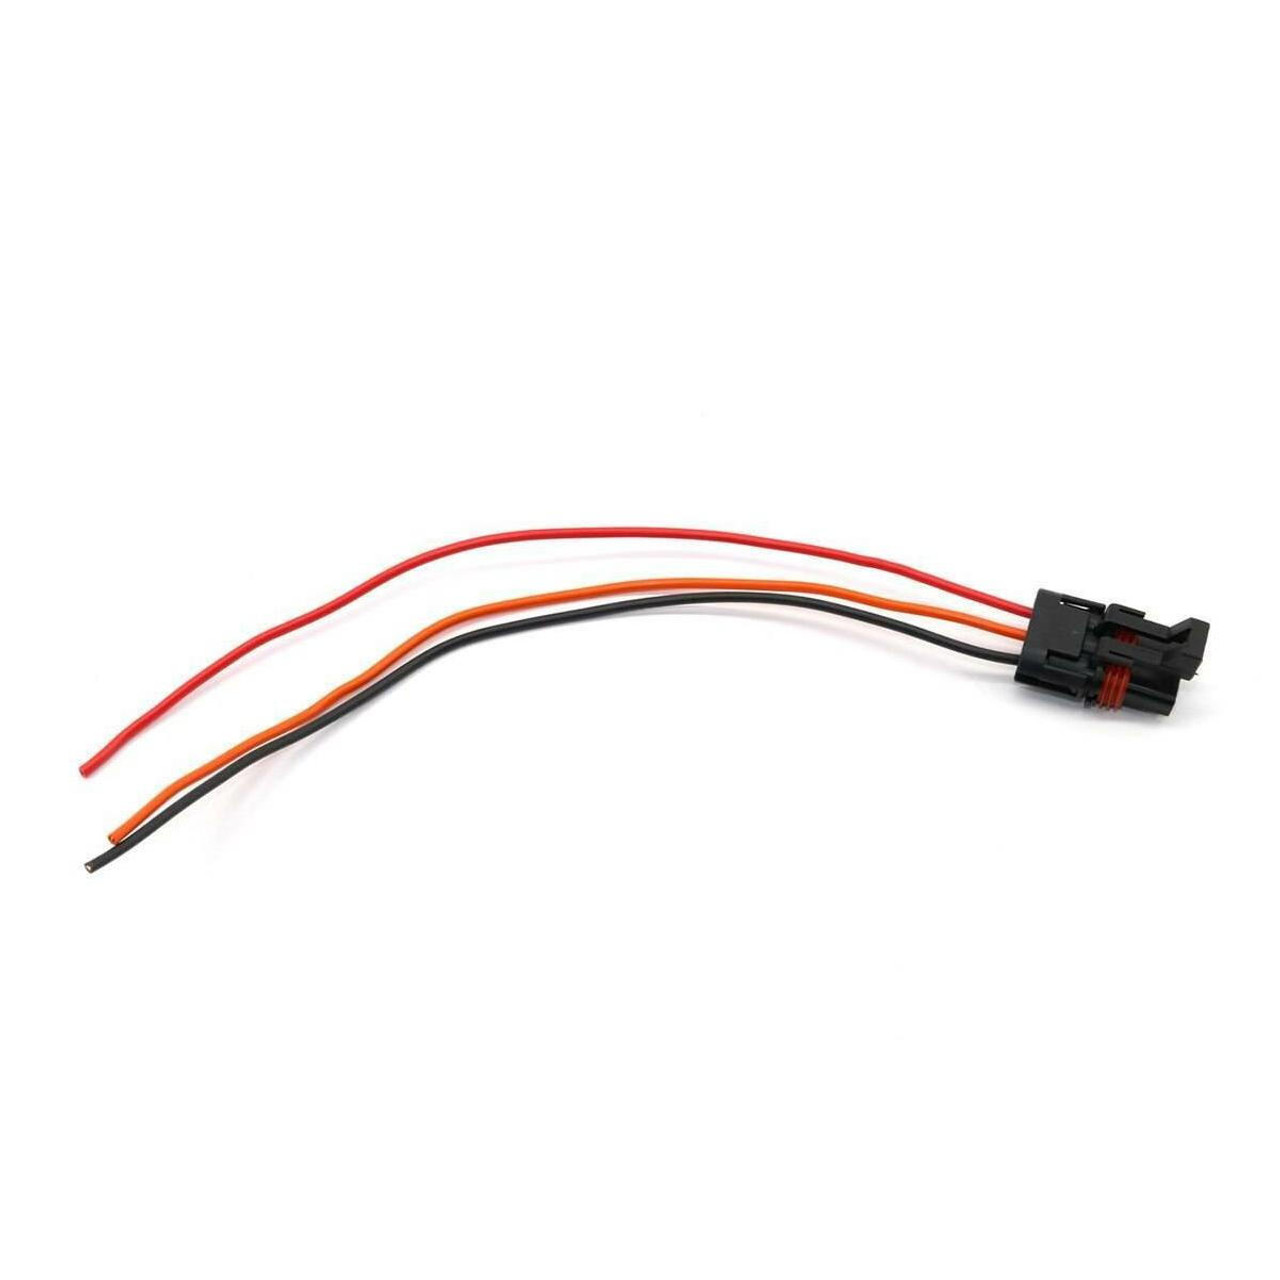 Buy XTC Polaris Pulse Busbar Accessory Wiring Harness w/ 14 Gauge 12v/IGN/GND  Wires at UTV Source. Best Prices. Best Service.